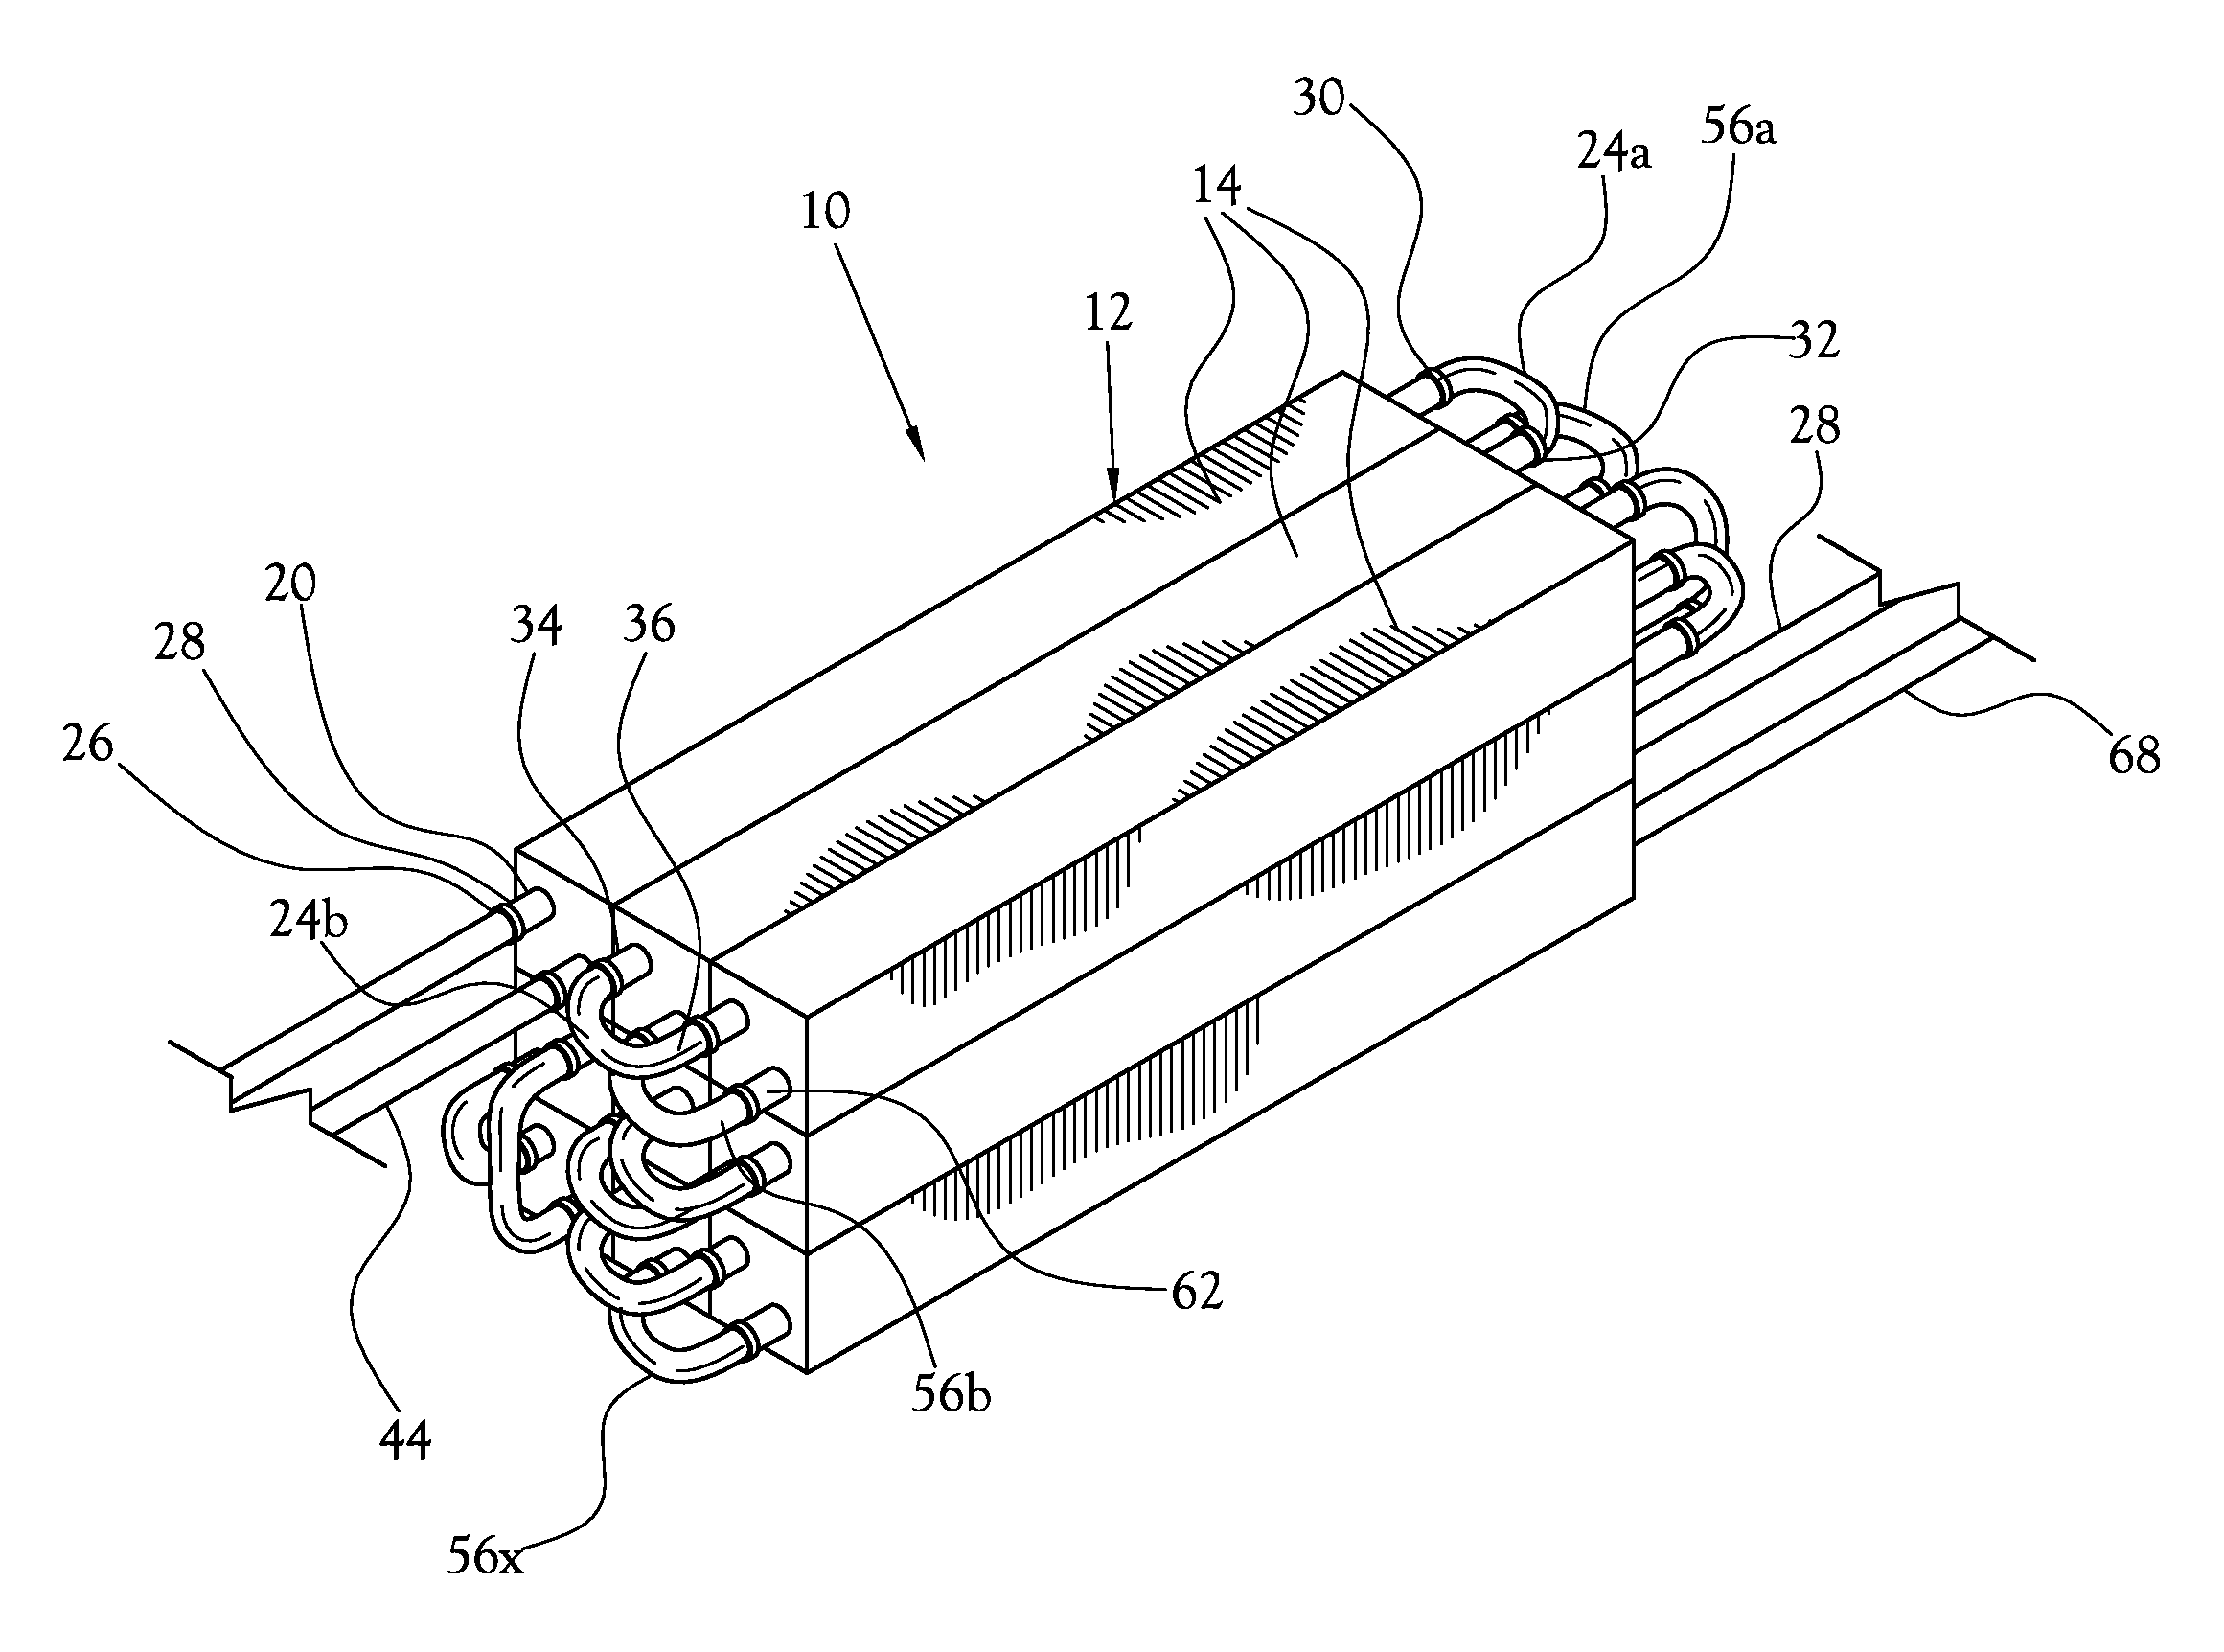 Modular Thermal Energy Retention and Transfer System